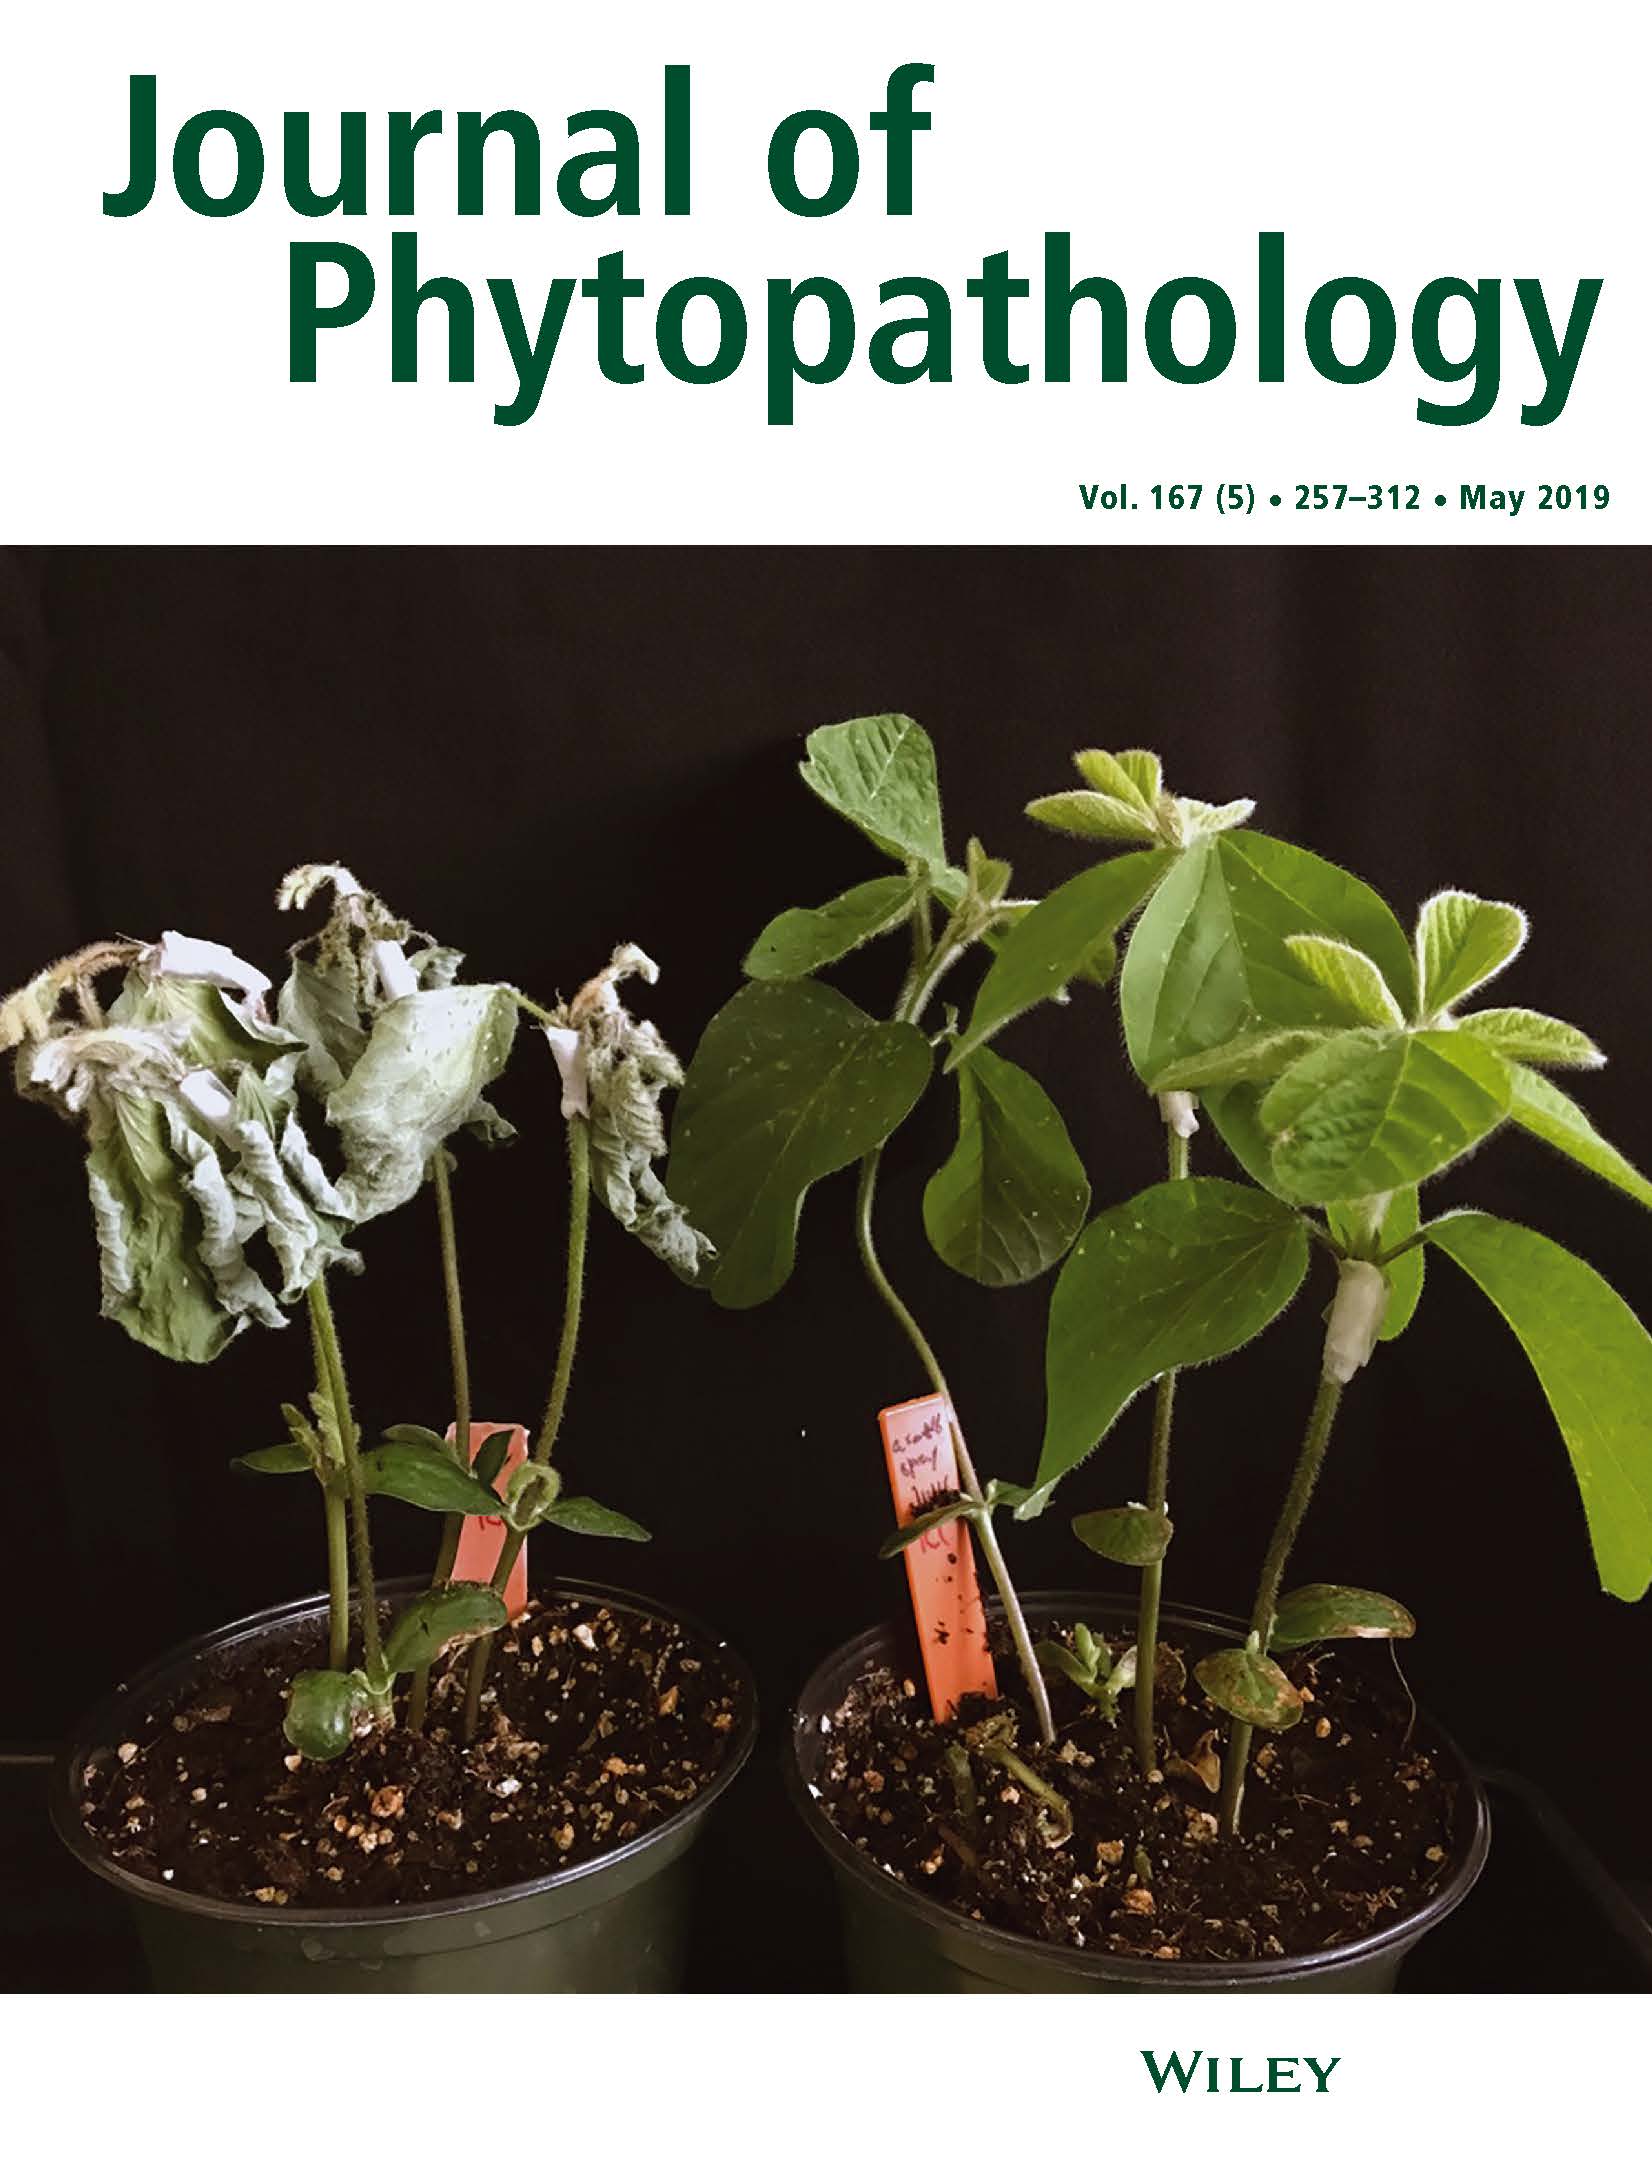 The cover of the May 2019 issue of Journal of Phytopathology shows that soybean plants treated with Ascribe’s lead product were healthier and had higher survival rates compared with untreated seeds when infected with Phytophthora sojae. Photo credit: Aardra Kachroo, University of Kentucky